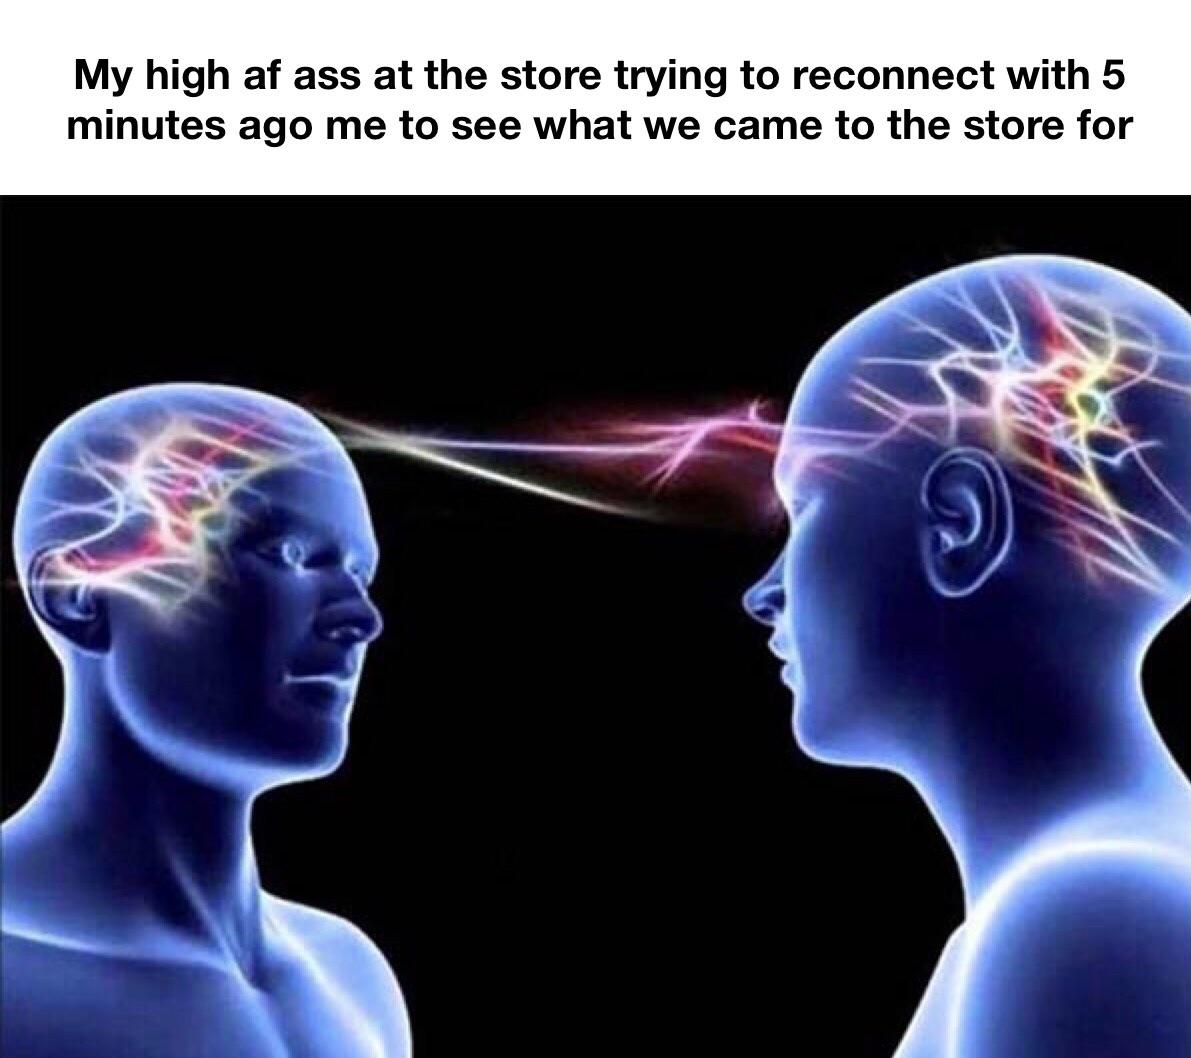 distance healing - My high af ass at the store trying to reconnect with 5 minutes ago me to see what we came to the store for